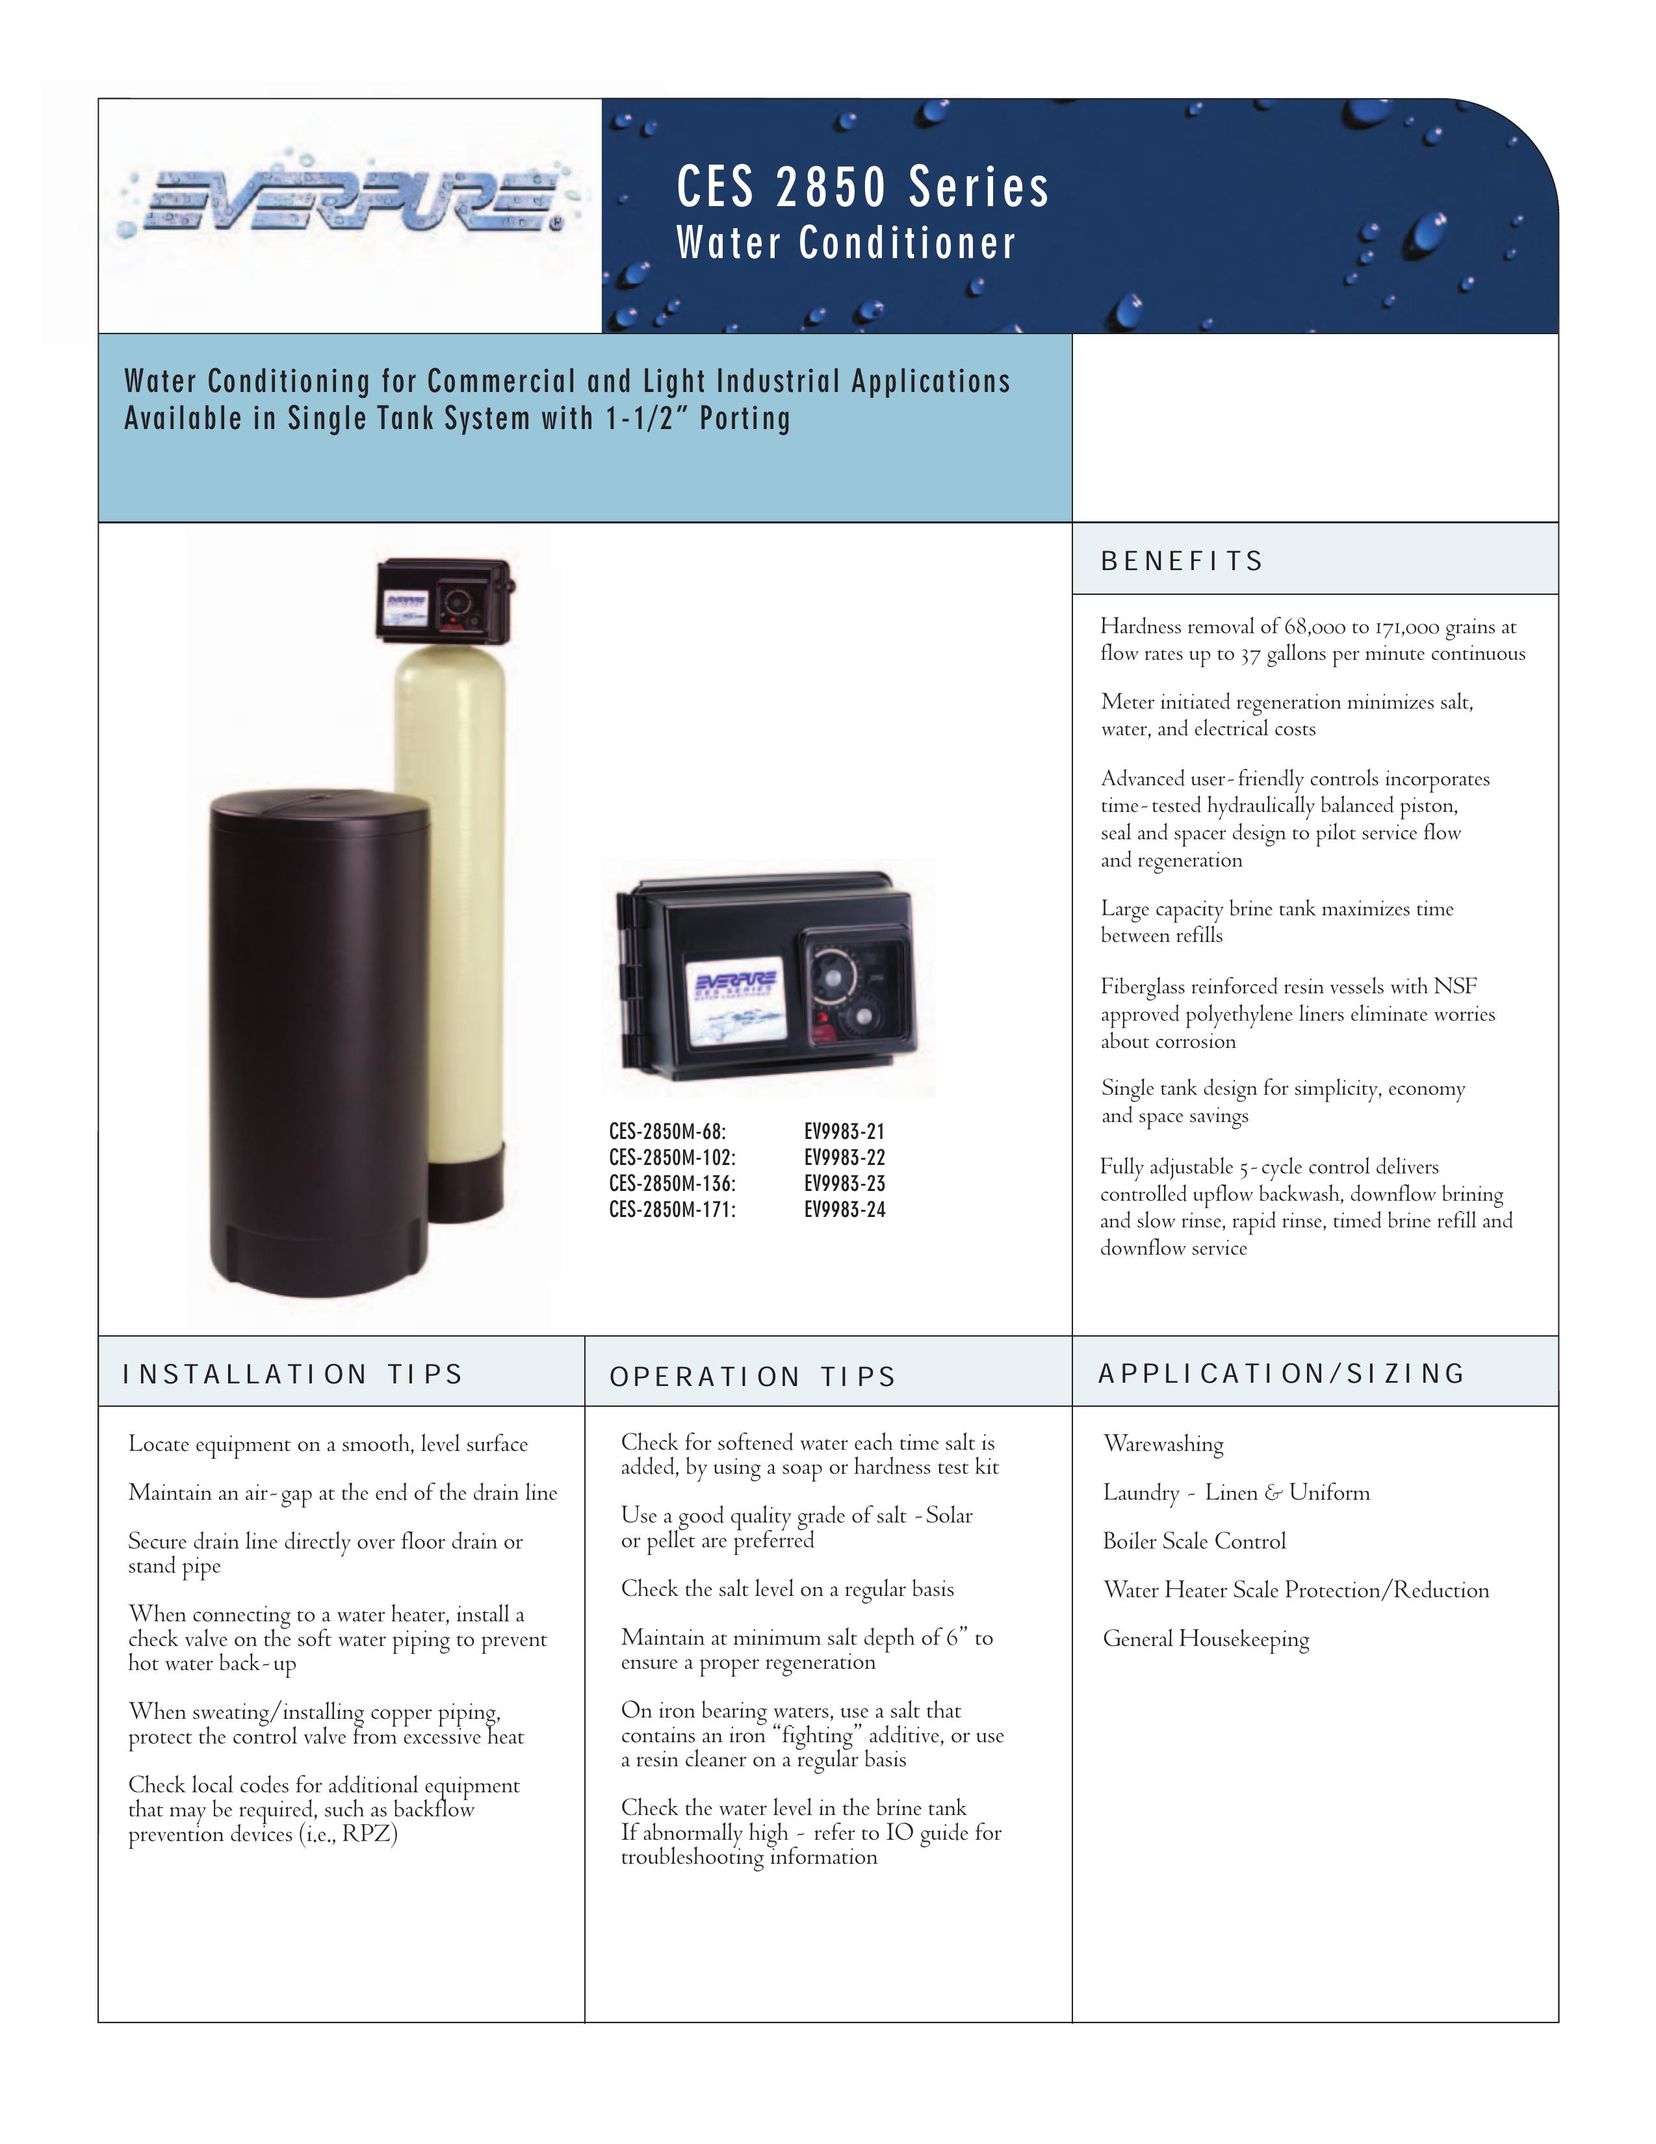 Everpure CES 2850 Series Water System User Manual